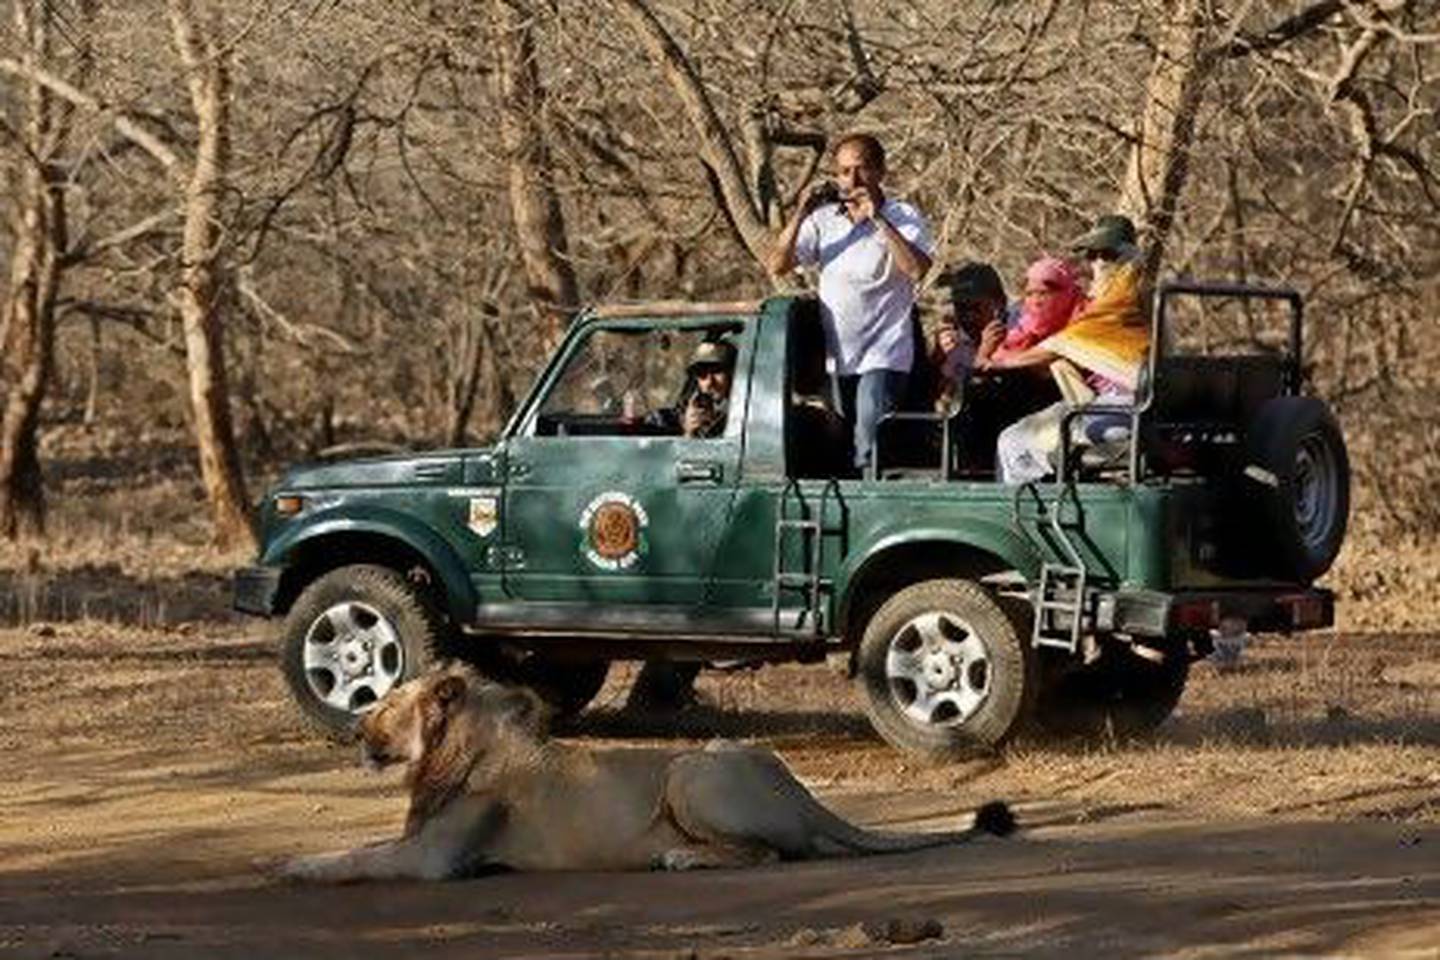 Tourists watch an Asiatic lion during a safari at the Gir sanctuary in the western Indian state of Gujarat.